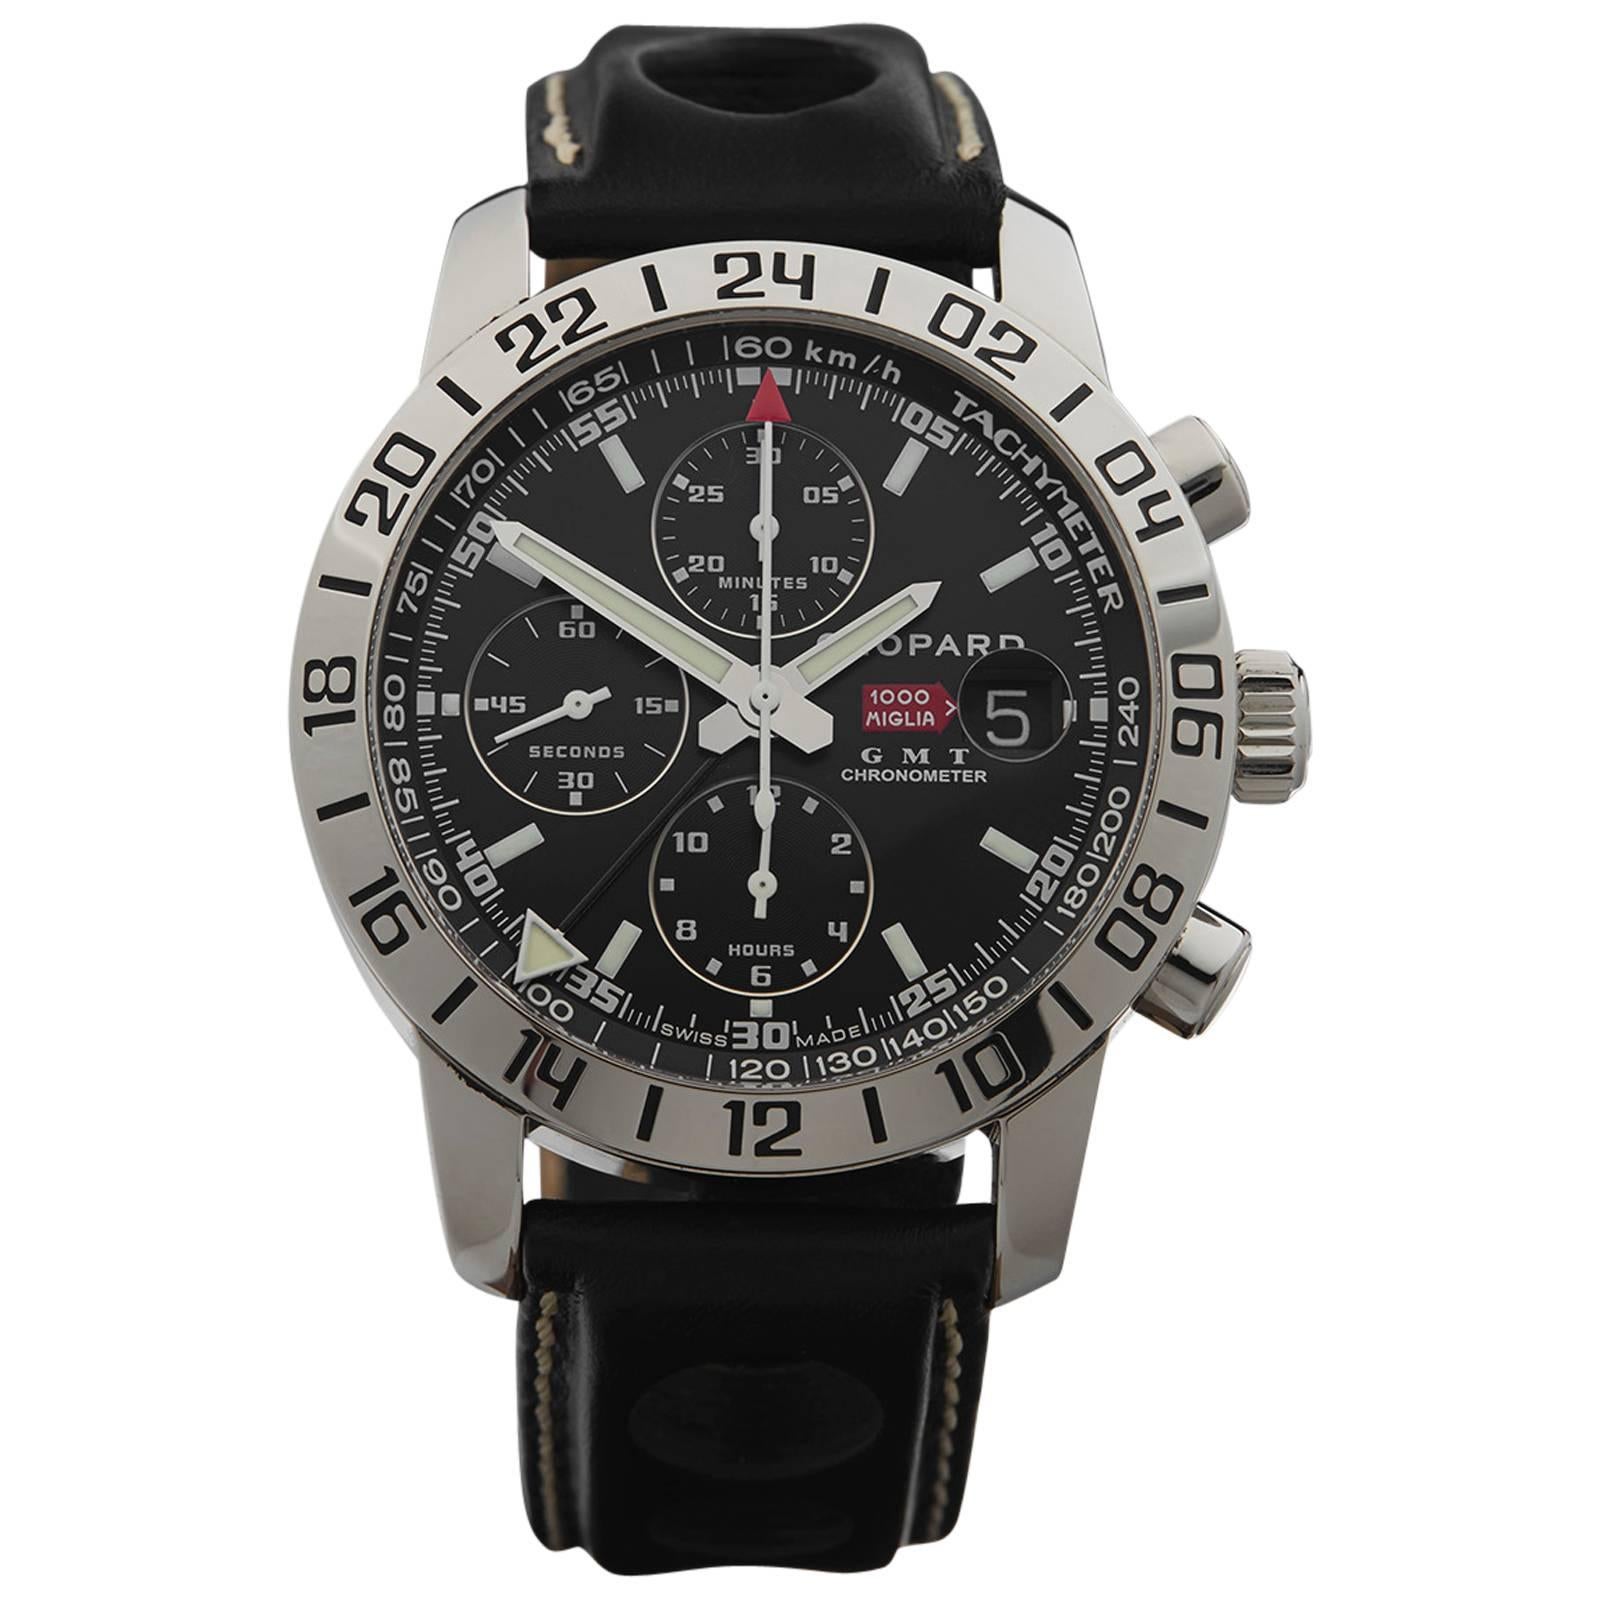 Chopard Stainless Steel Mille Miglia GMT Chronograph Automatic Wristwatch